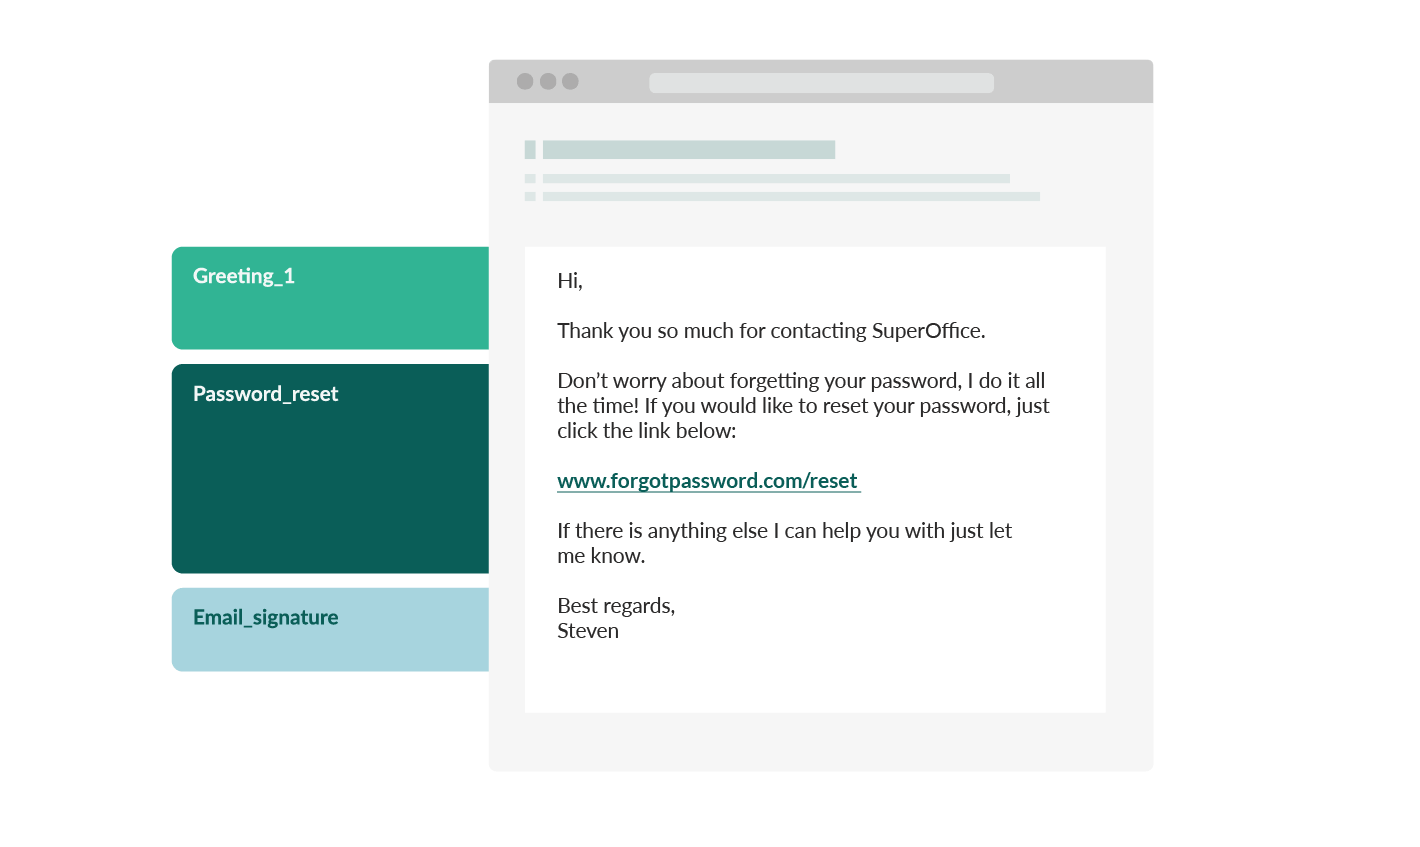 text shortcuts in email responses